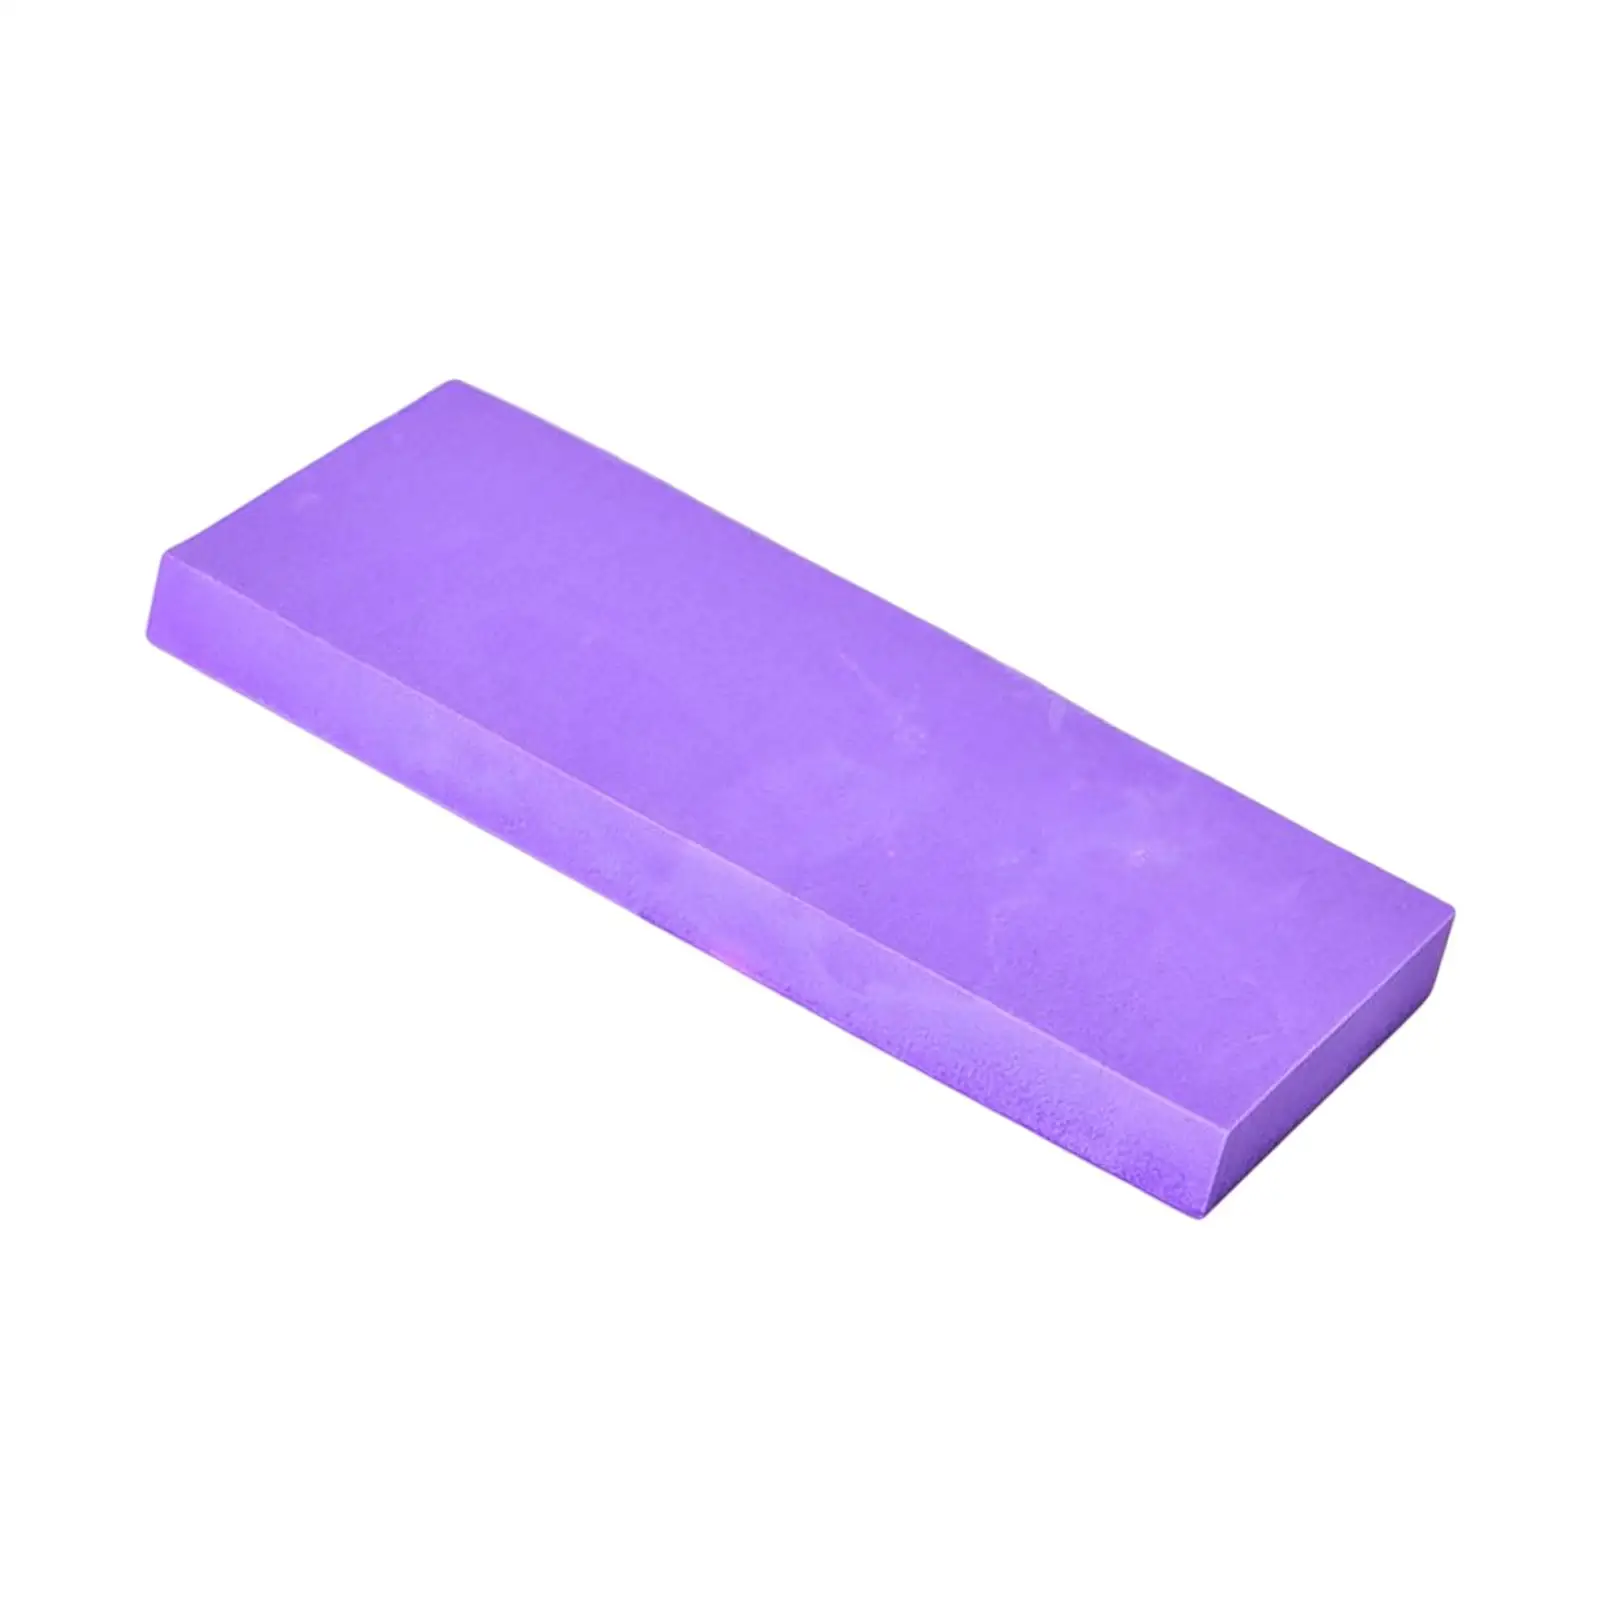 Strong Water Absorbing Sponge Washing Cleaning Sponge Multi Functional Ceramic Art Tool Block for Ceramics Clay Artists Shaping